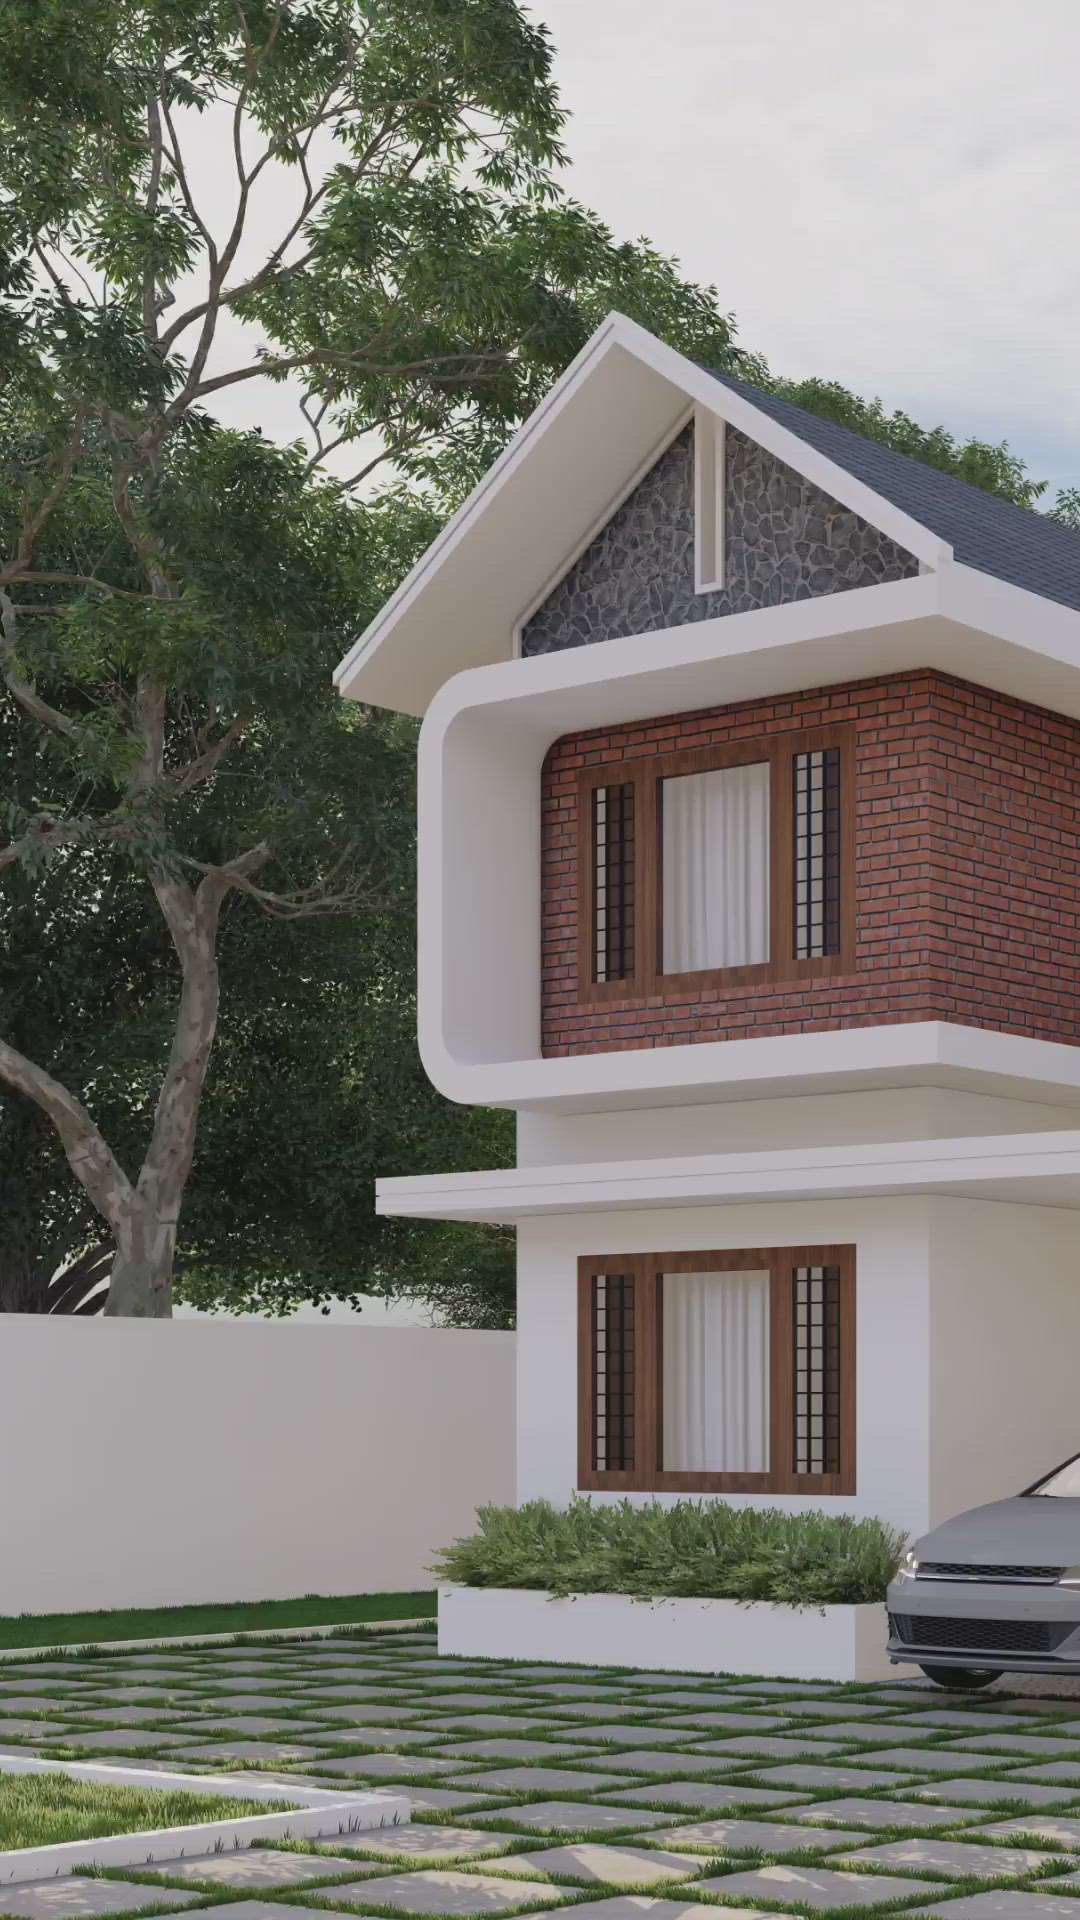 3d view# kerala traditional design # modern architecture # lumion# 
cont# 9745265762